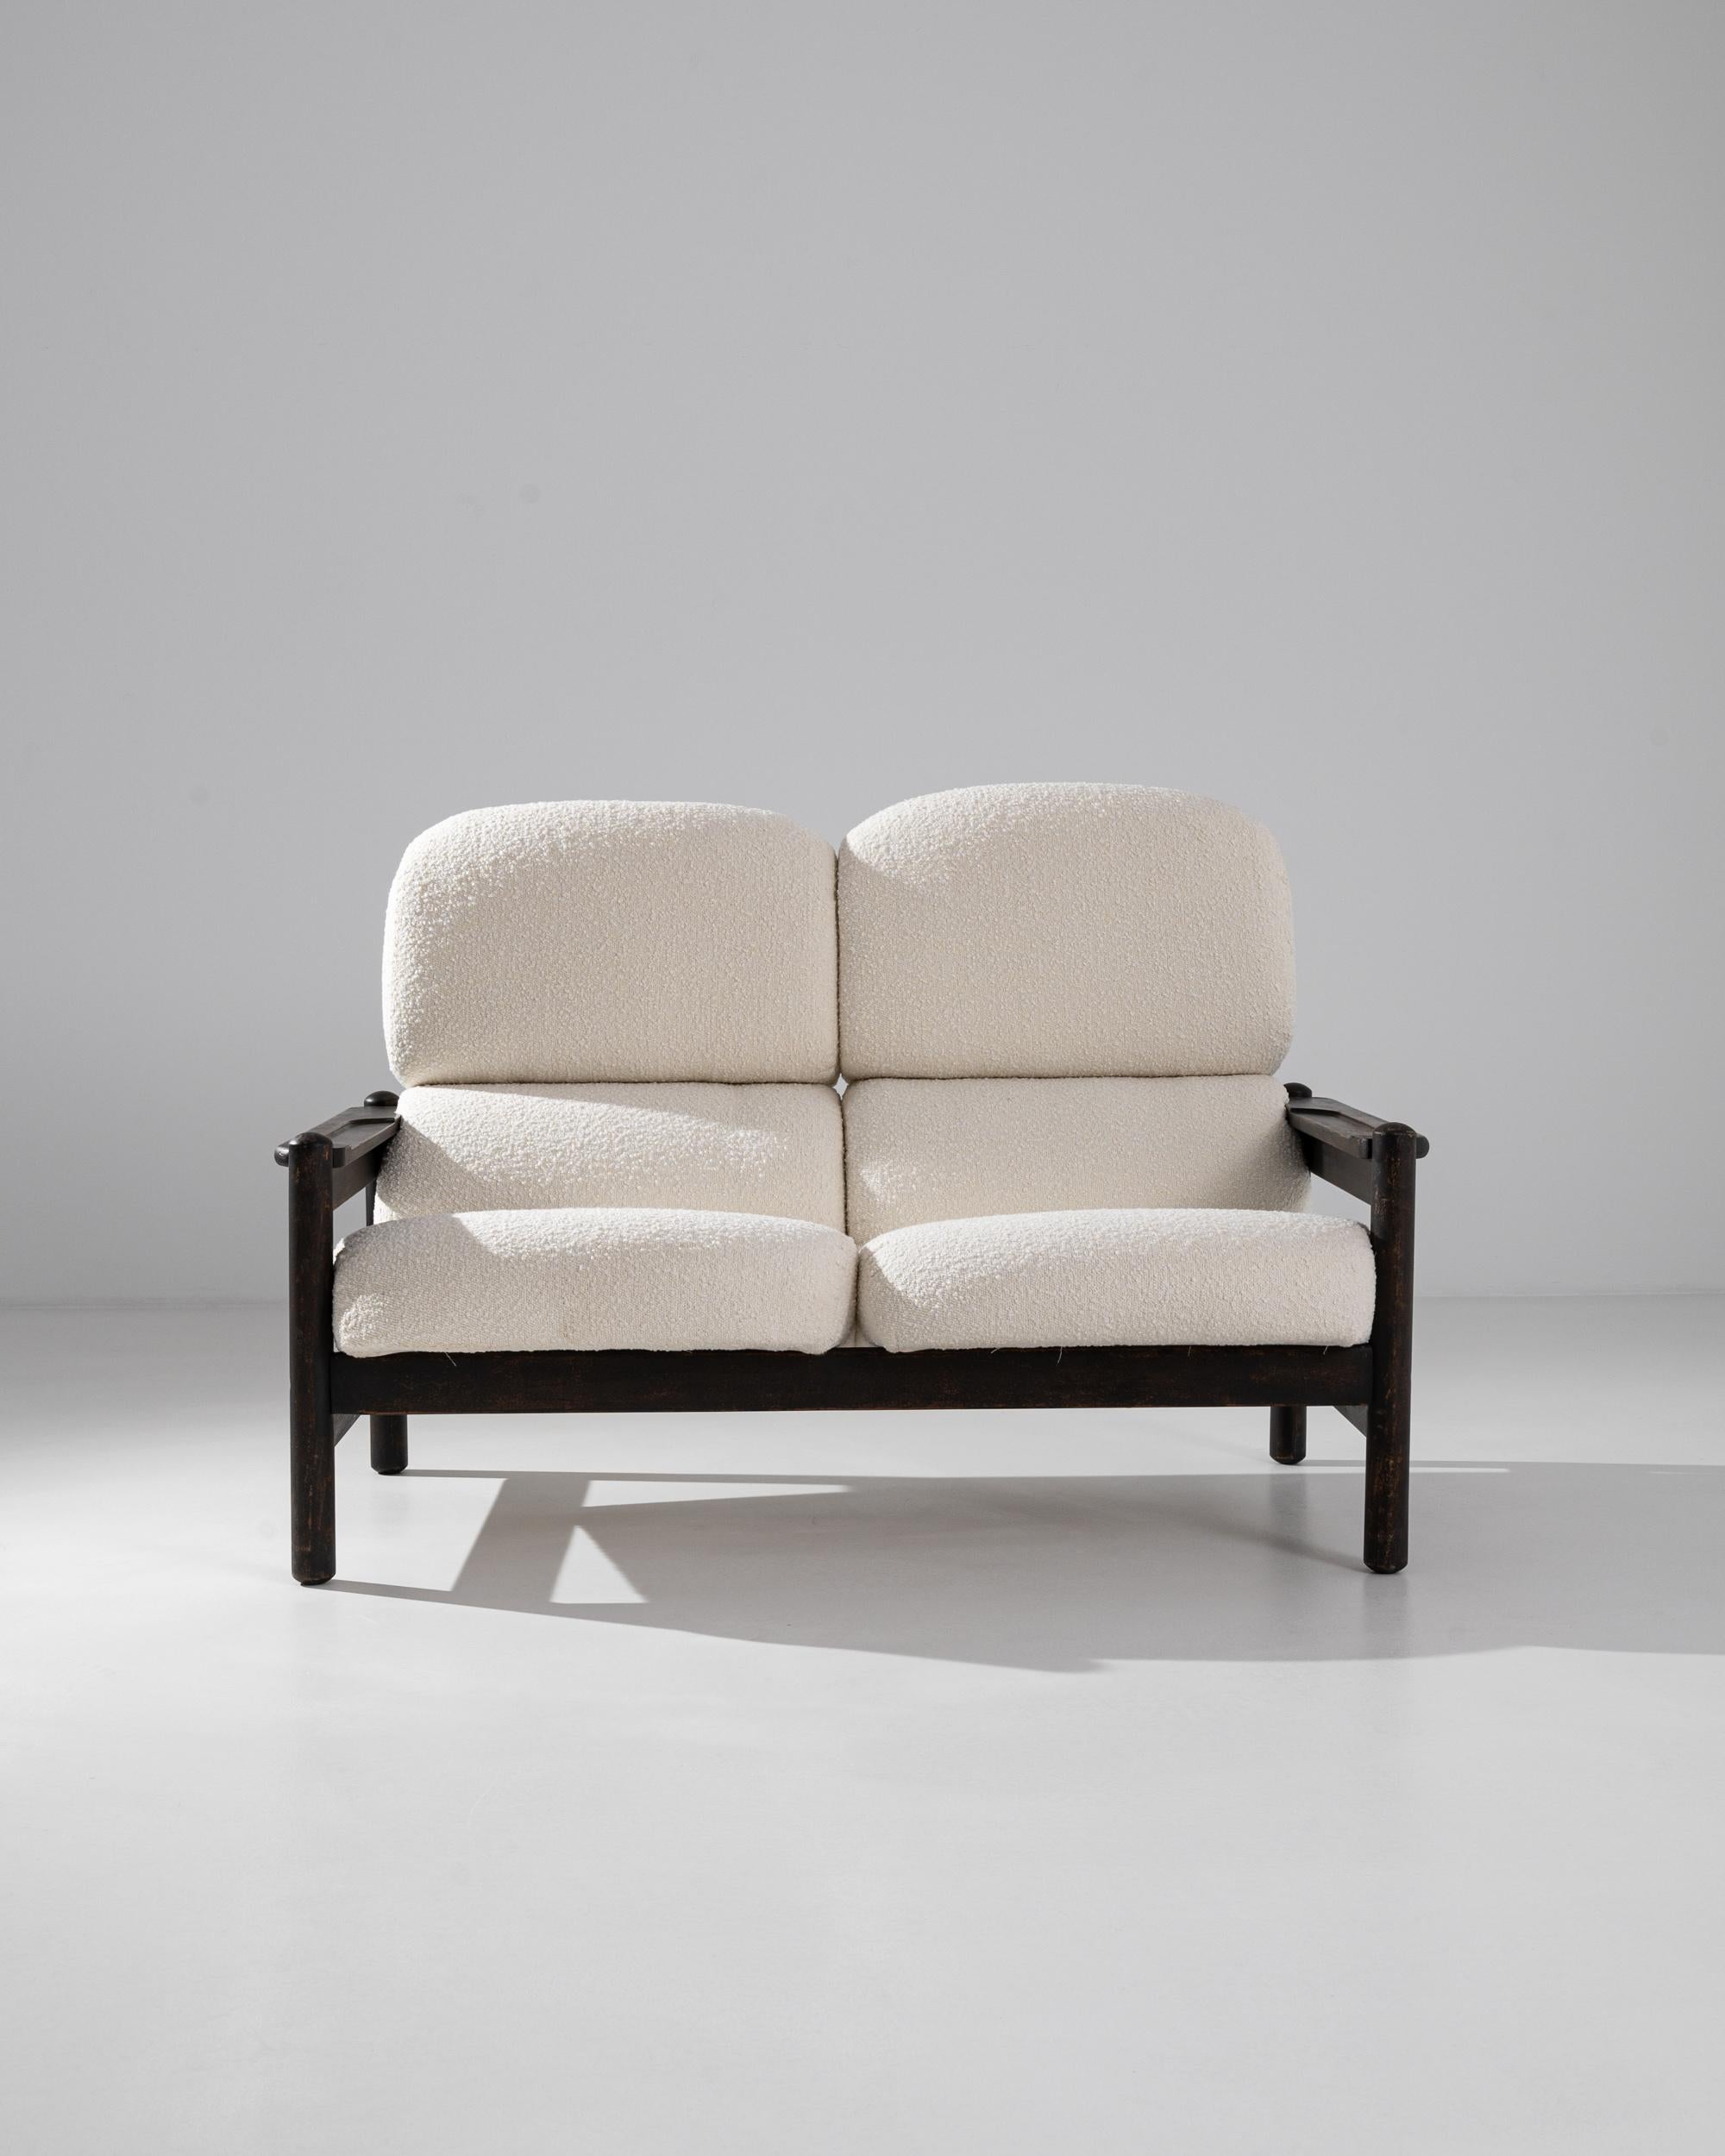 This vintage loveseat offers a flawless balance of sophistication and comfort. Made in Europe, the design is both graphic and relaxed: the clean rectilinear lines of the wooden frame are softened by the rounded ends of the legs; the full cushions of